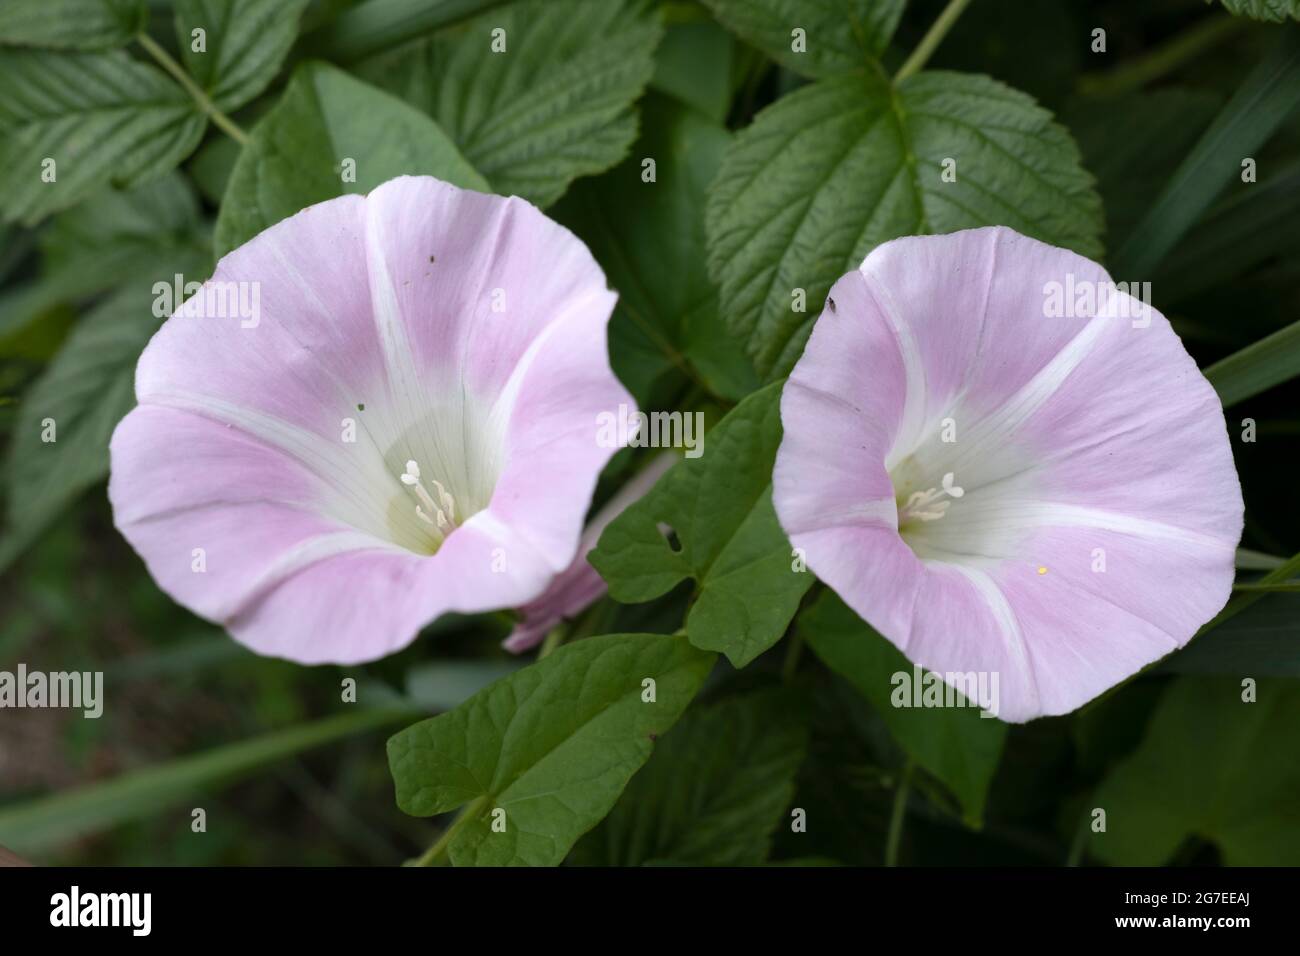 Calystegia sepium, known as Hedge bindweed, Rutland beauty, Bugle vine, Heavenly trumpets, Bellbind, Granny-pop-out-of-bed flowers in close up Stock Photo